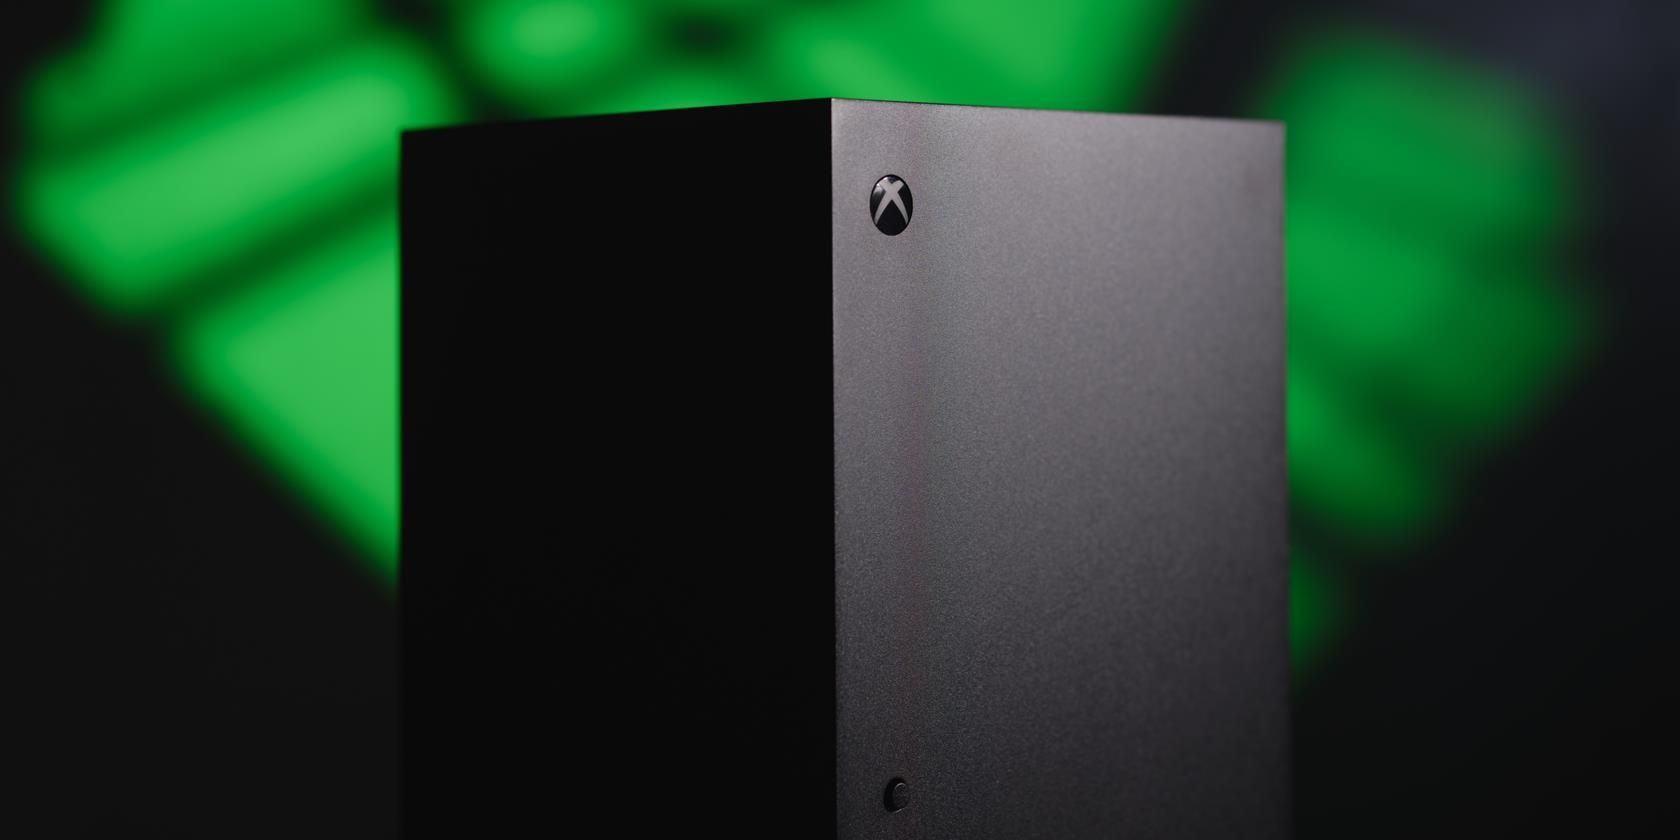 Xbox Series X/S Tips (2023): 20 Settings and Hidden Features to Try